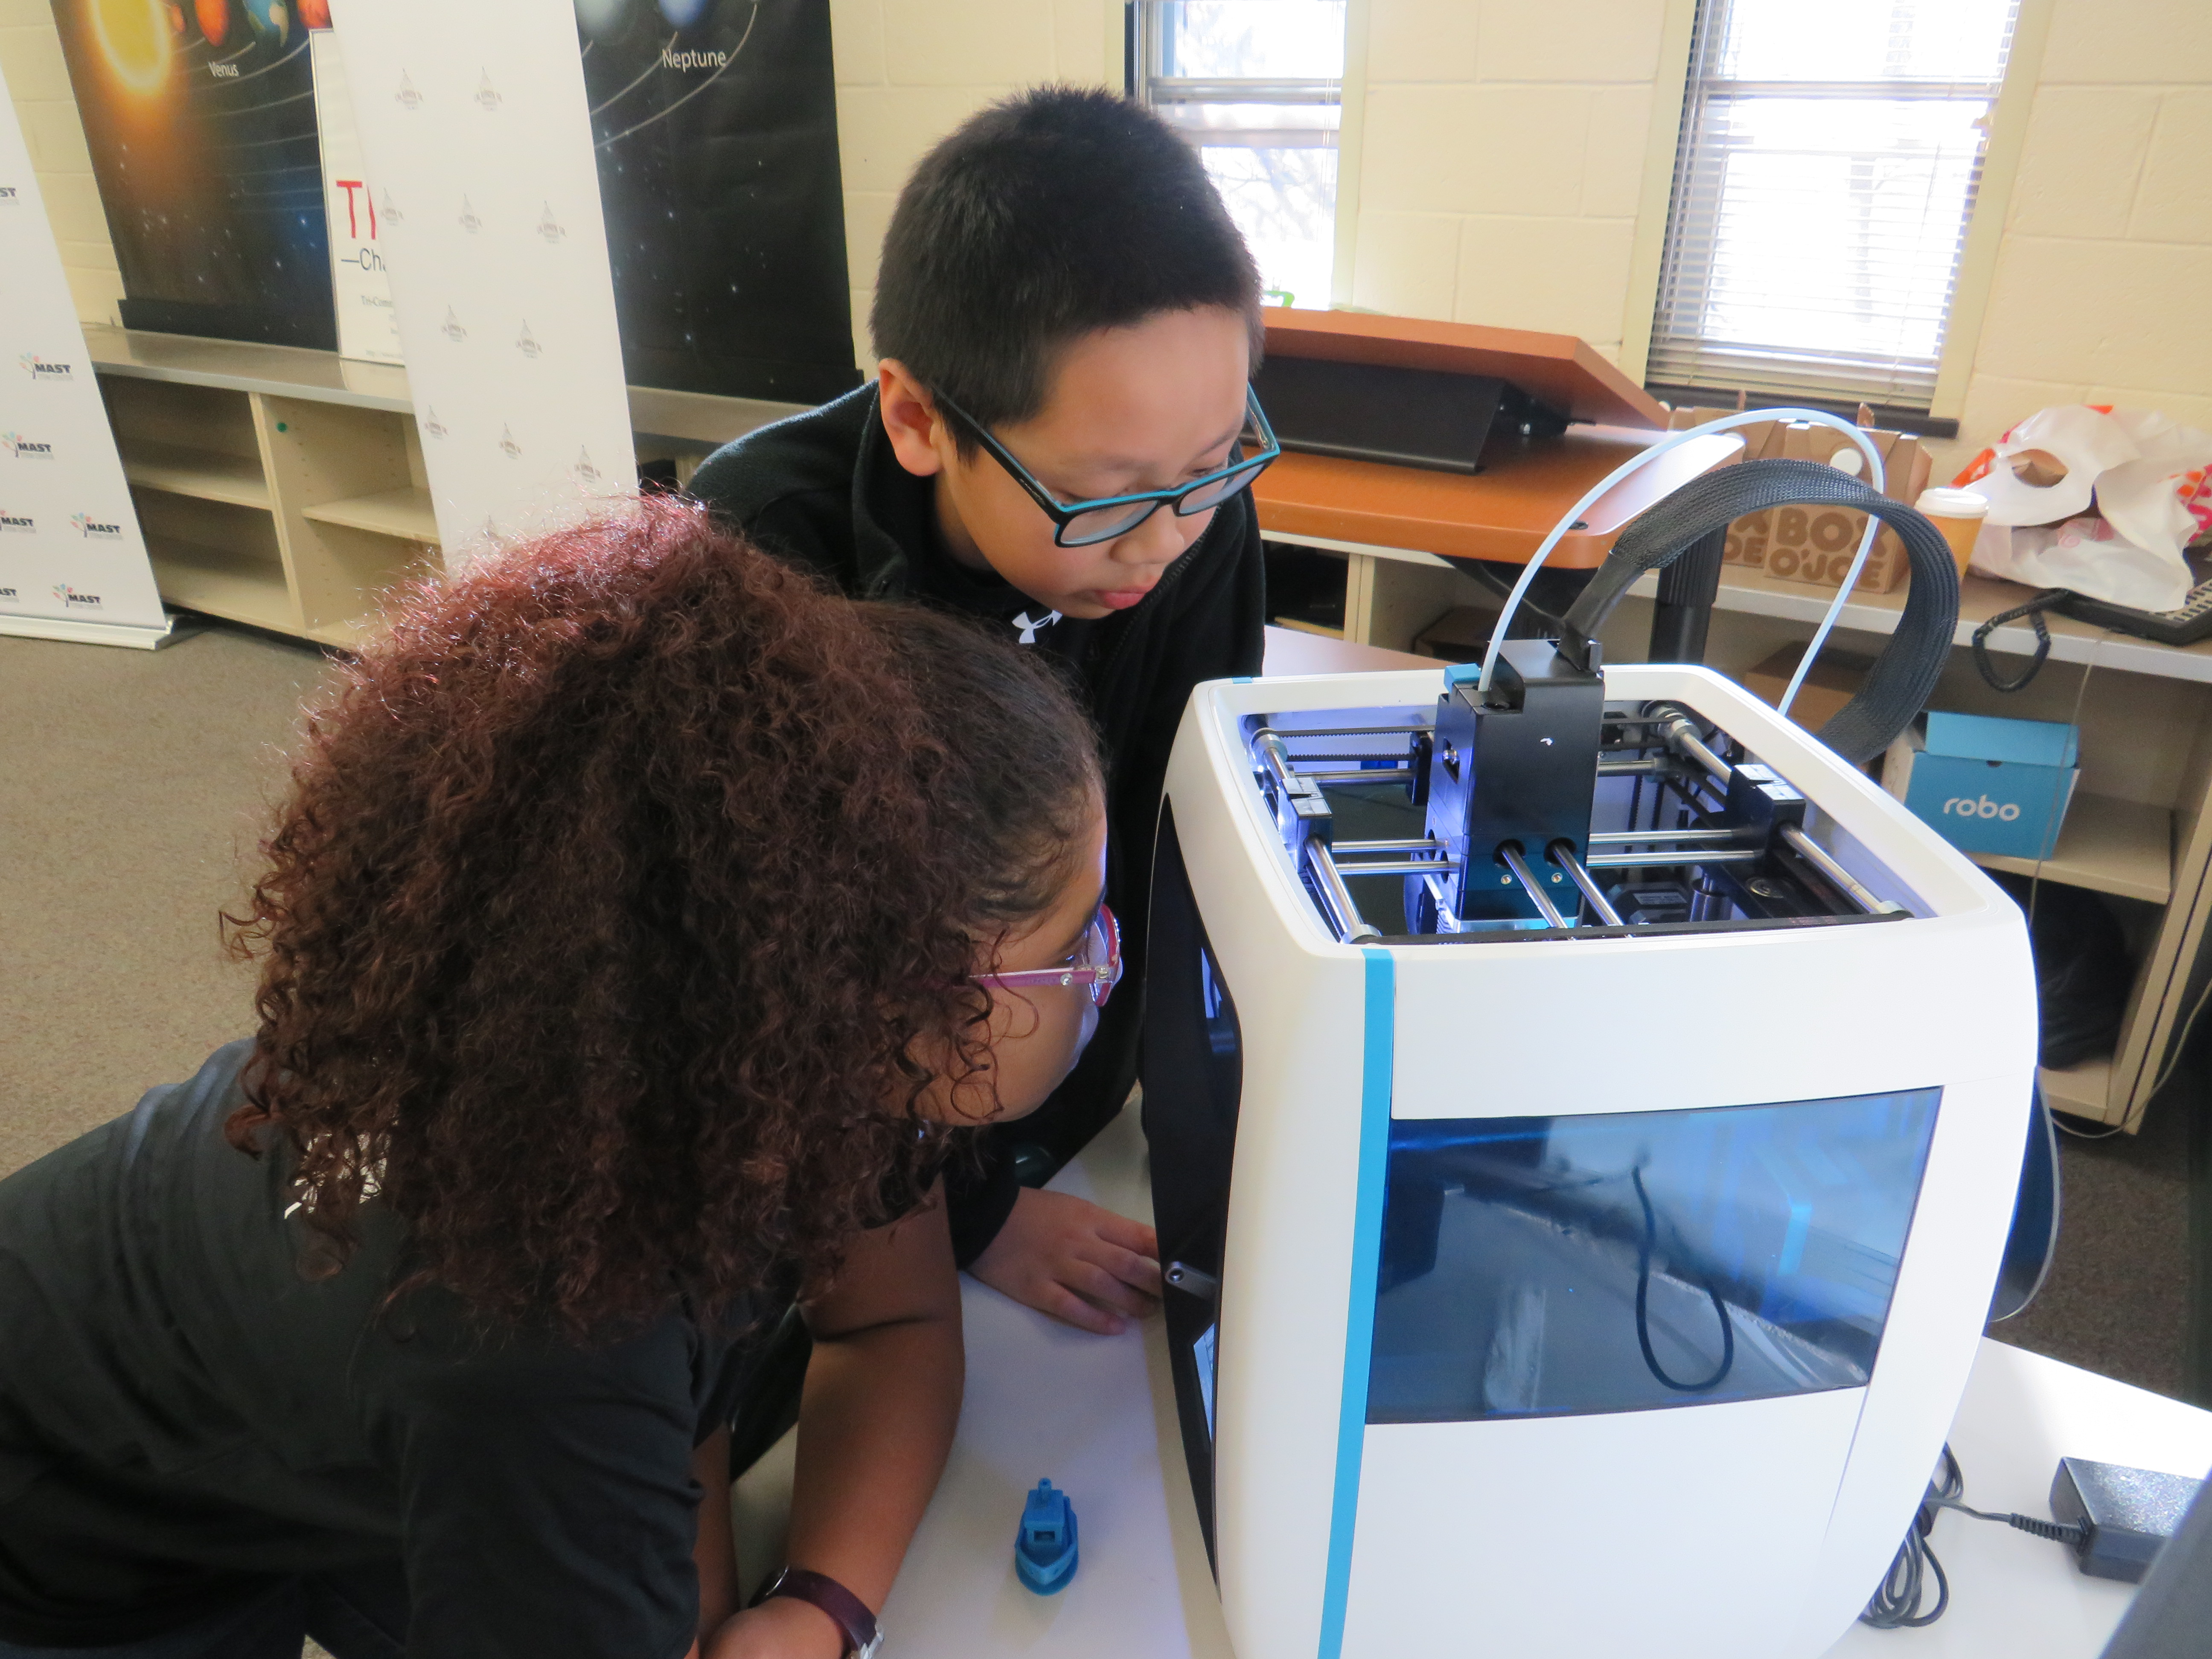 Students watching a 3D Printer in action